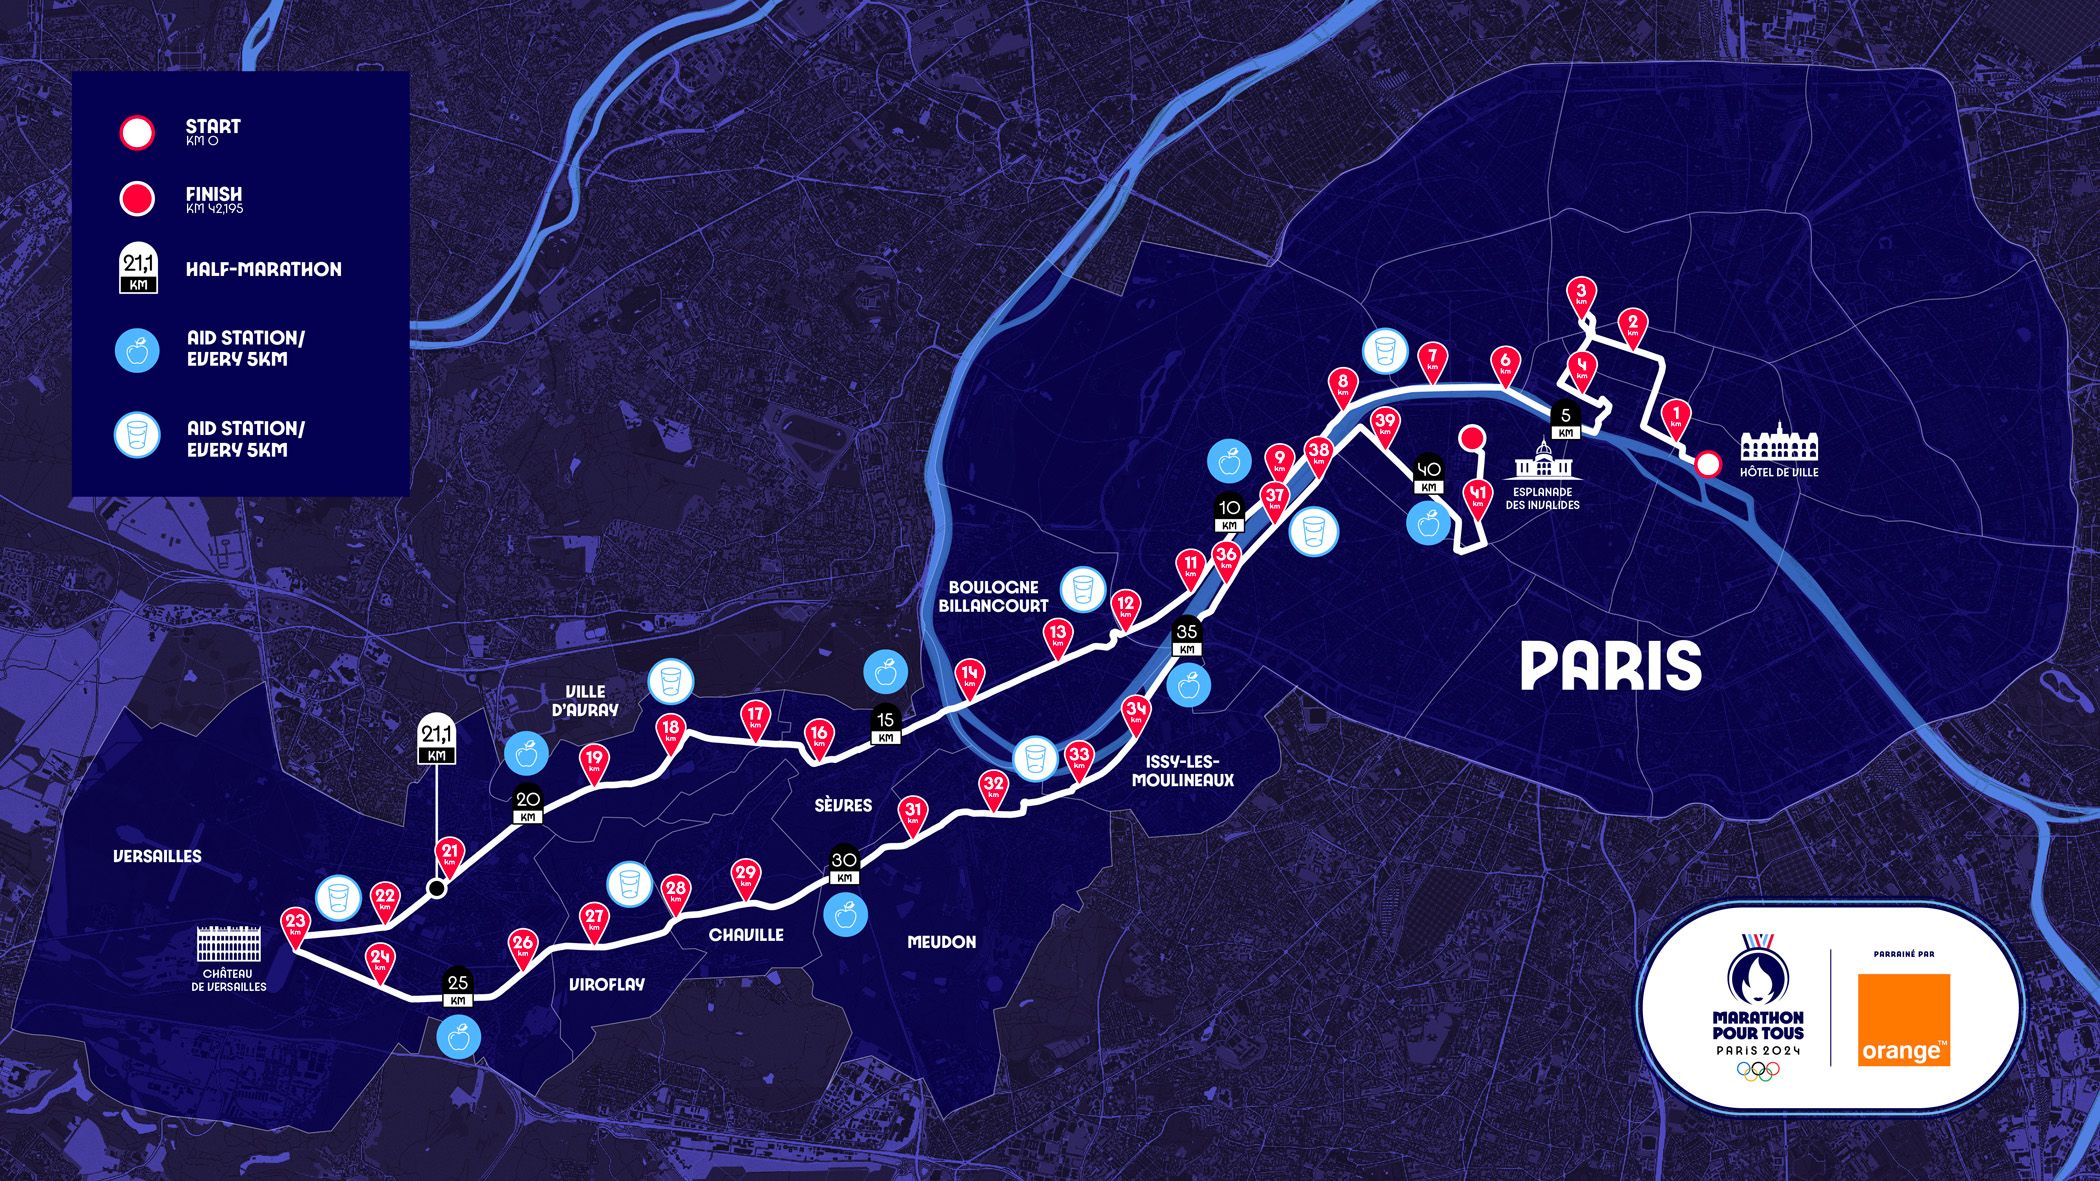 Mass event run course for the Paris 2024 Olympic Games